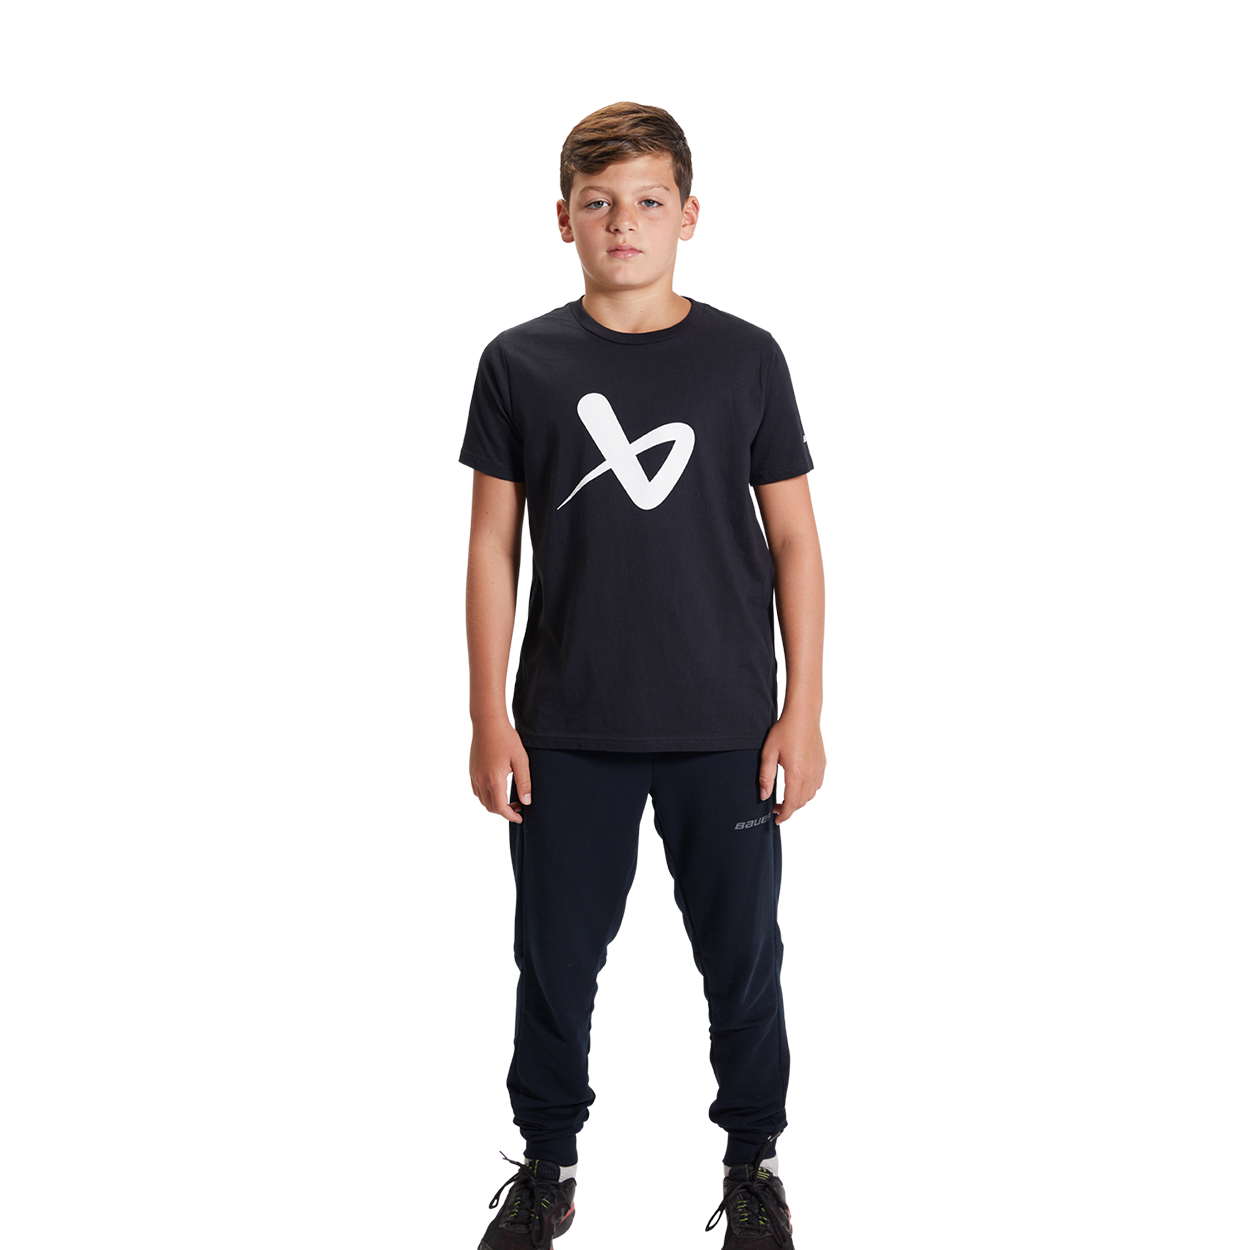 BAUER CORE SHORTSLEEVE CREW YOUTH